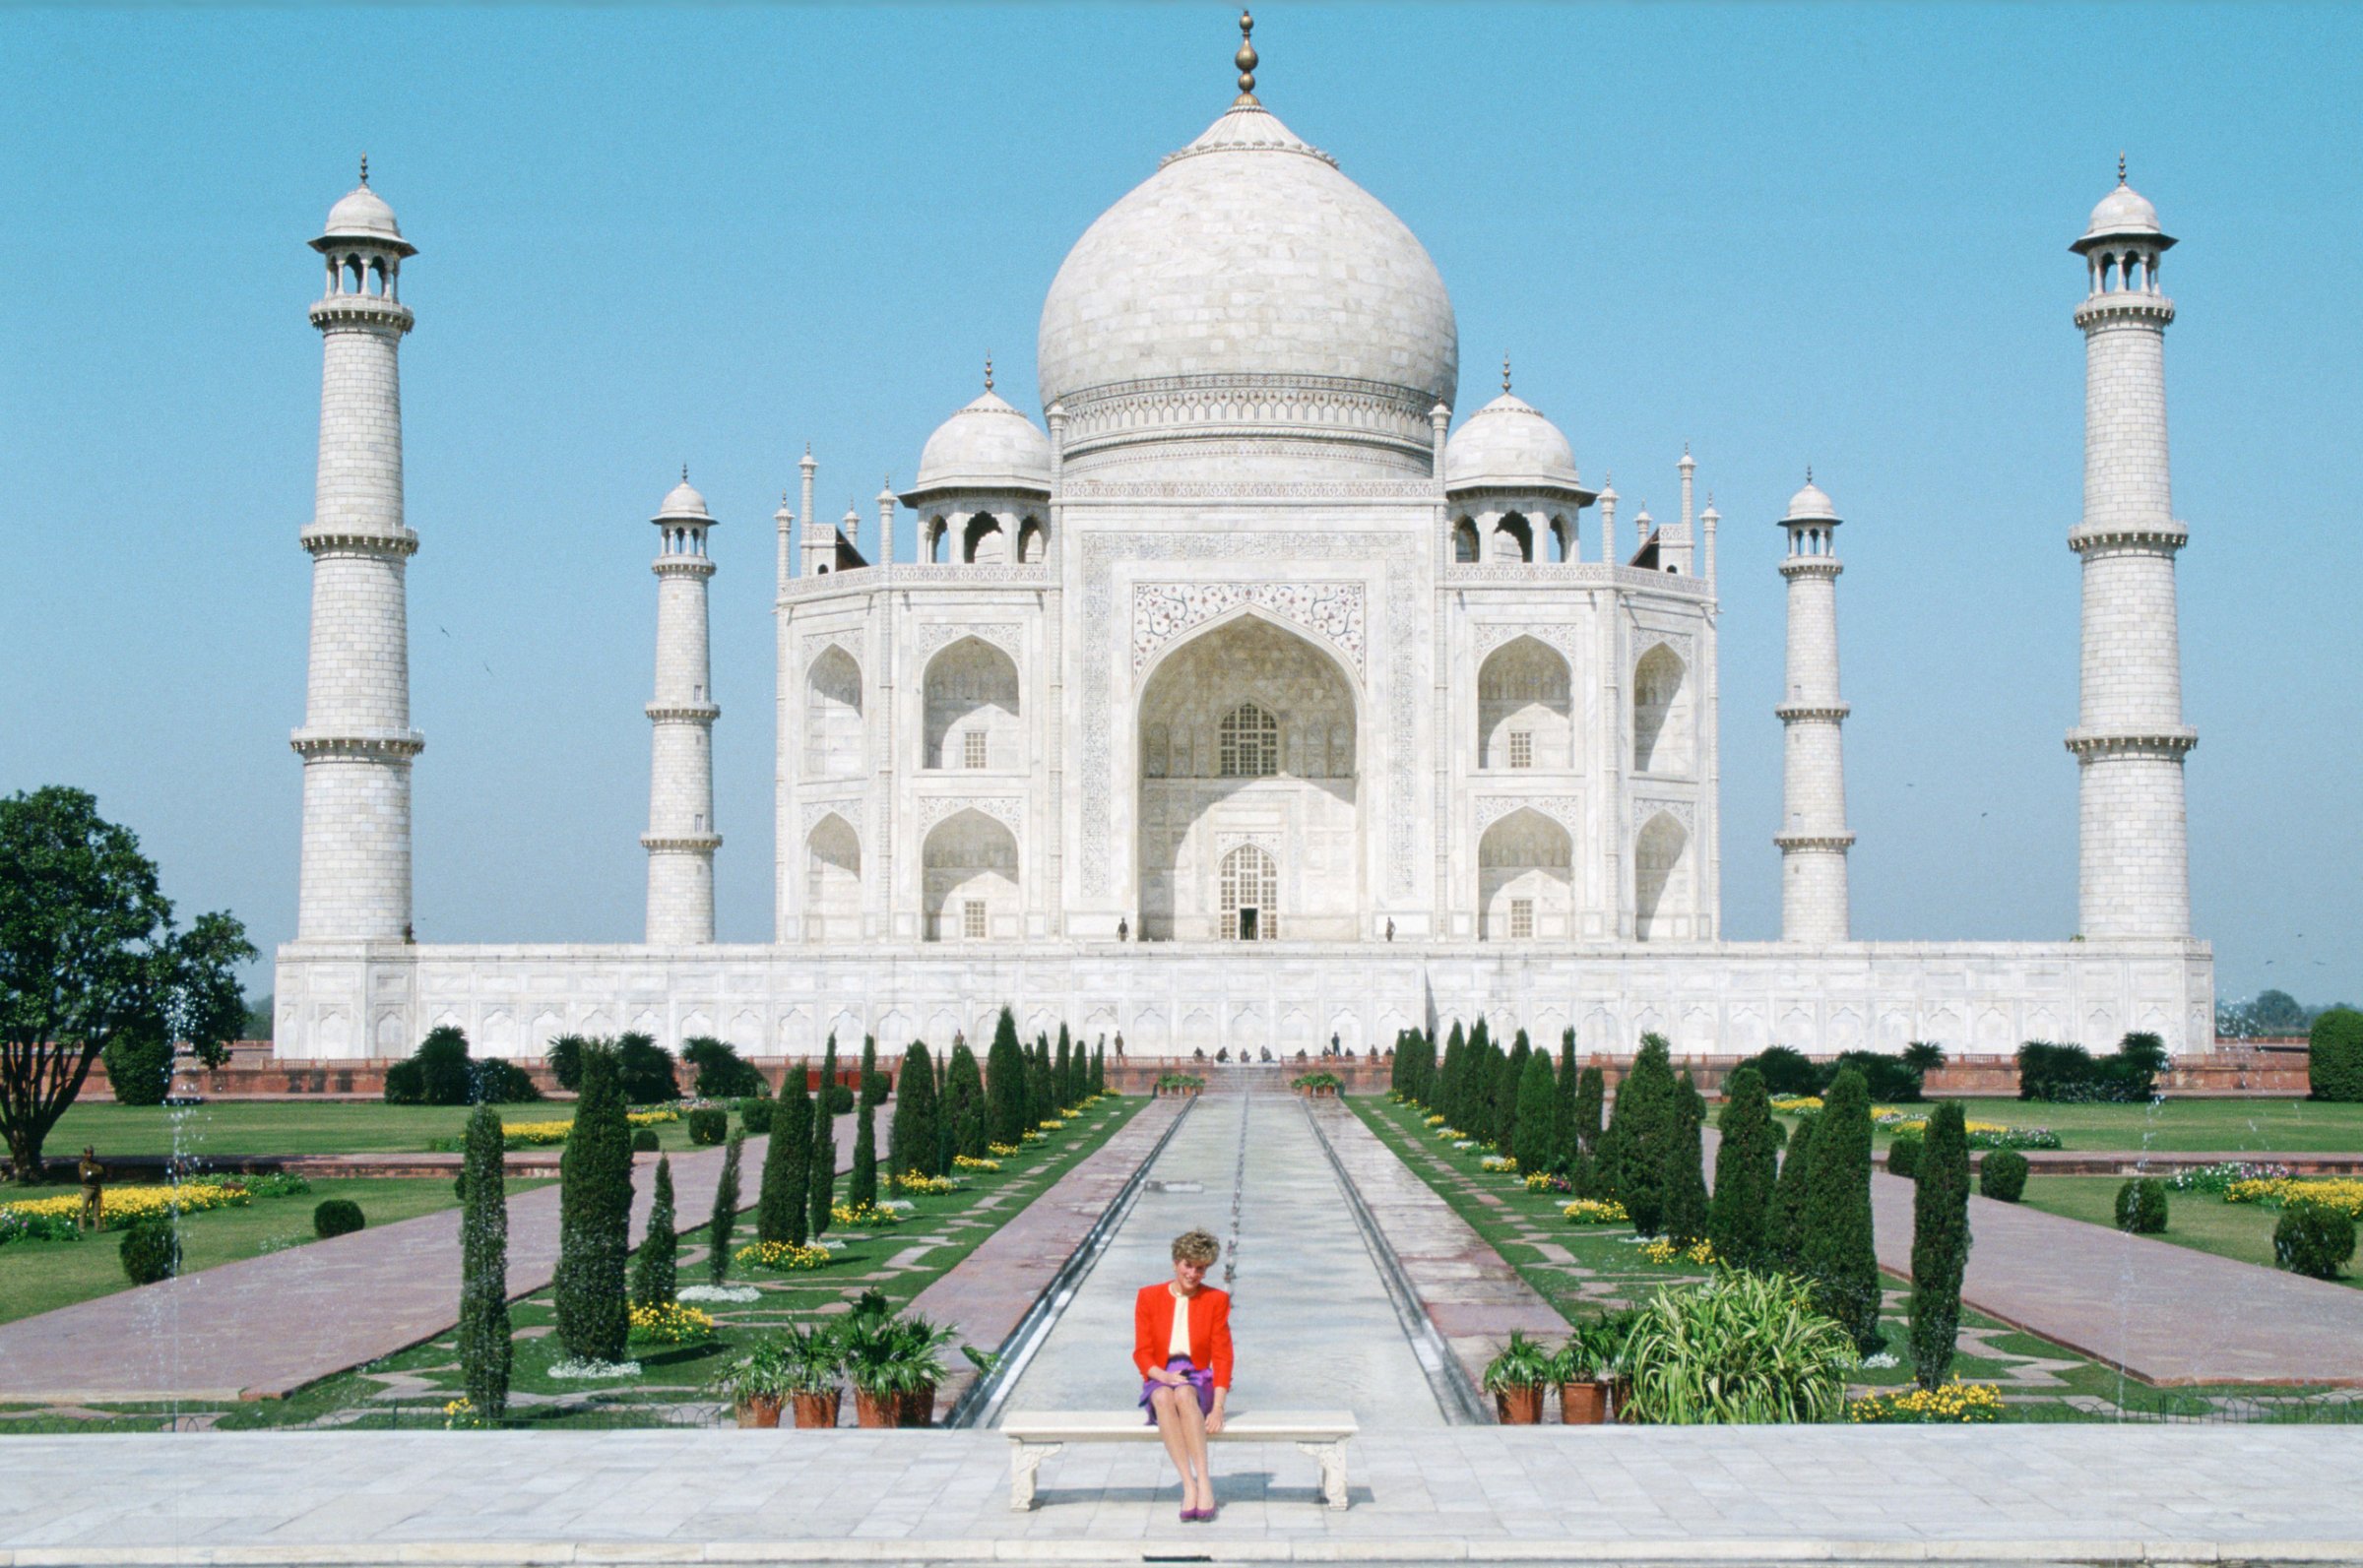 Diana Princess of Wales sits in front of the Taj Mahal during a visit to India, Feb. 11, 1992.